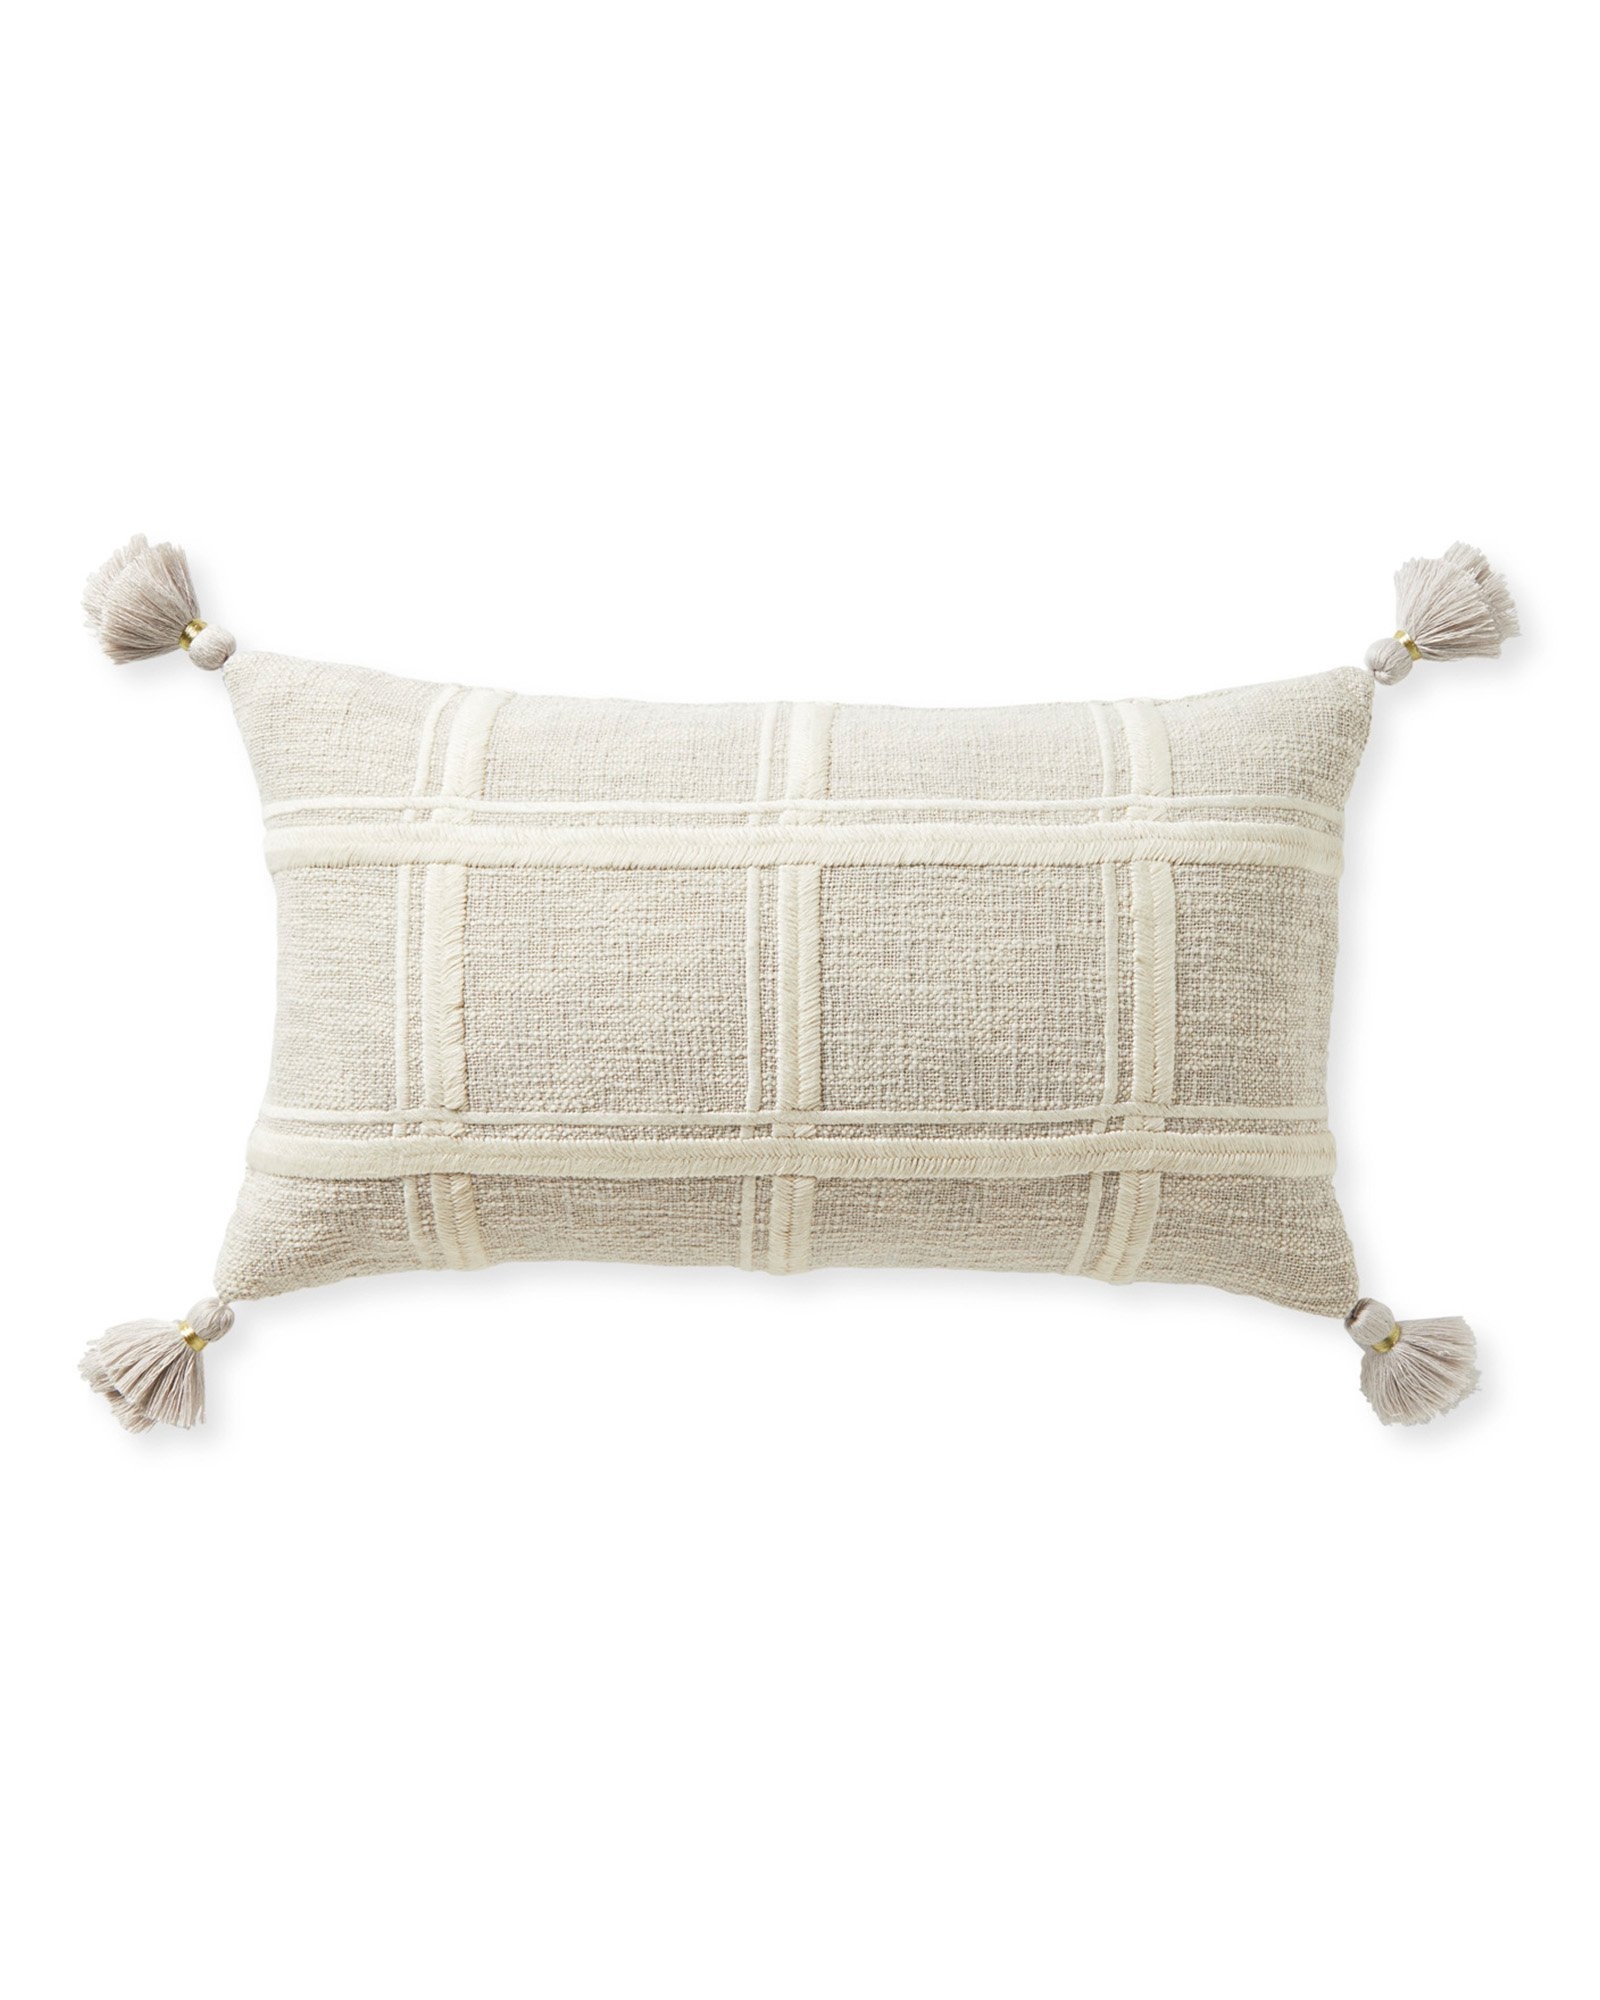 Ashby Pillow Cover - Image 1